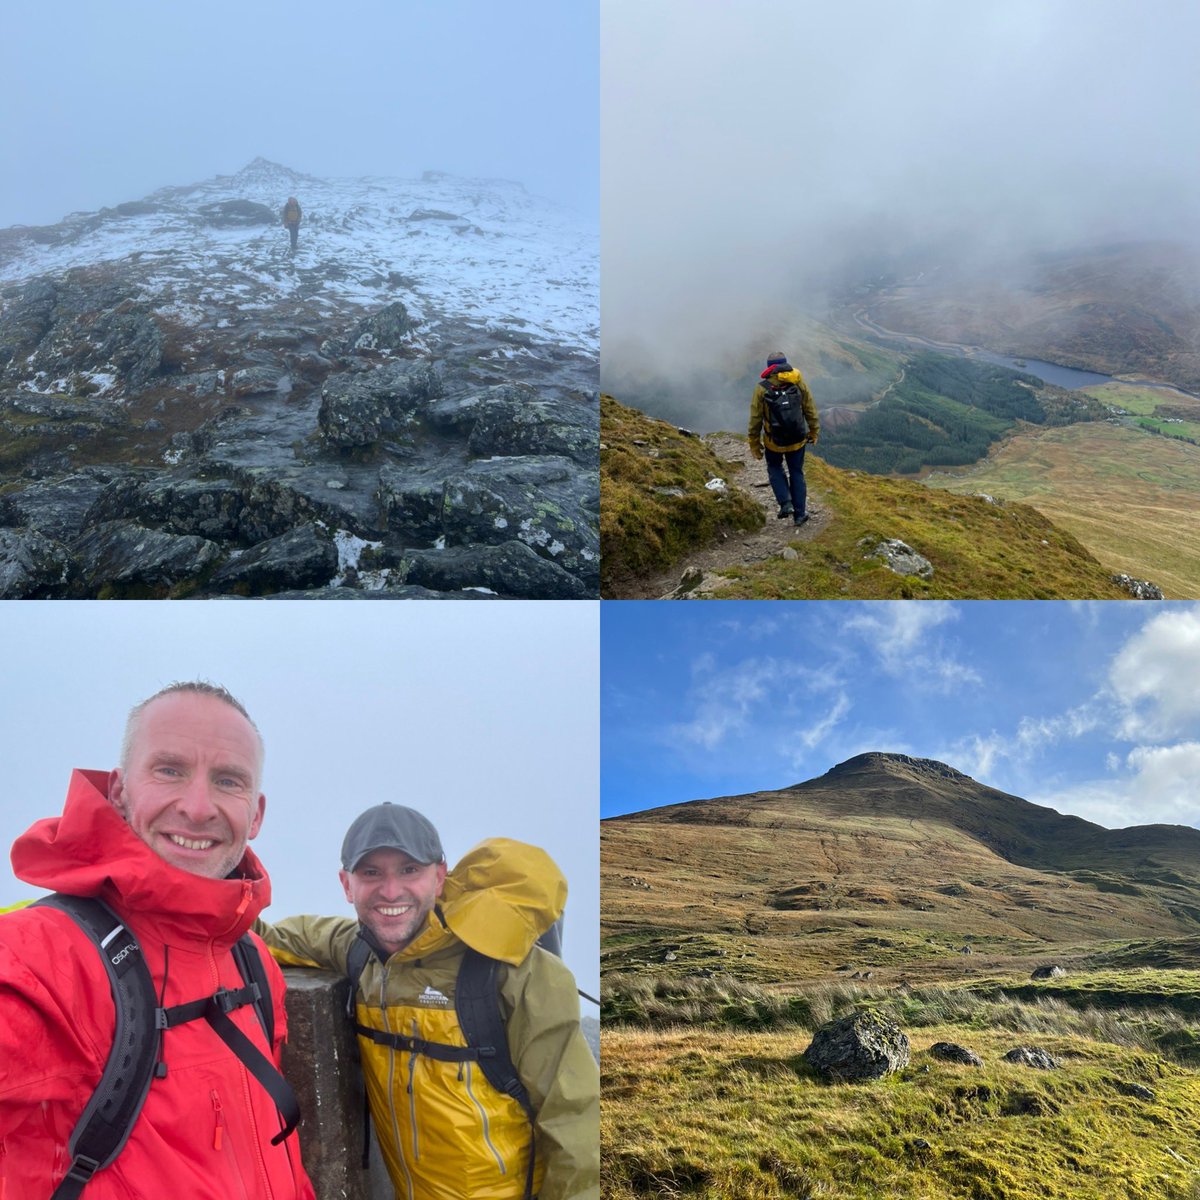 So awesome to be back in the Highlands of Scotland - climbing a mountain in the wind, rain & snow with an old friend 😀 @JDF_Keswick #Outdoors #mountaineering #friends